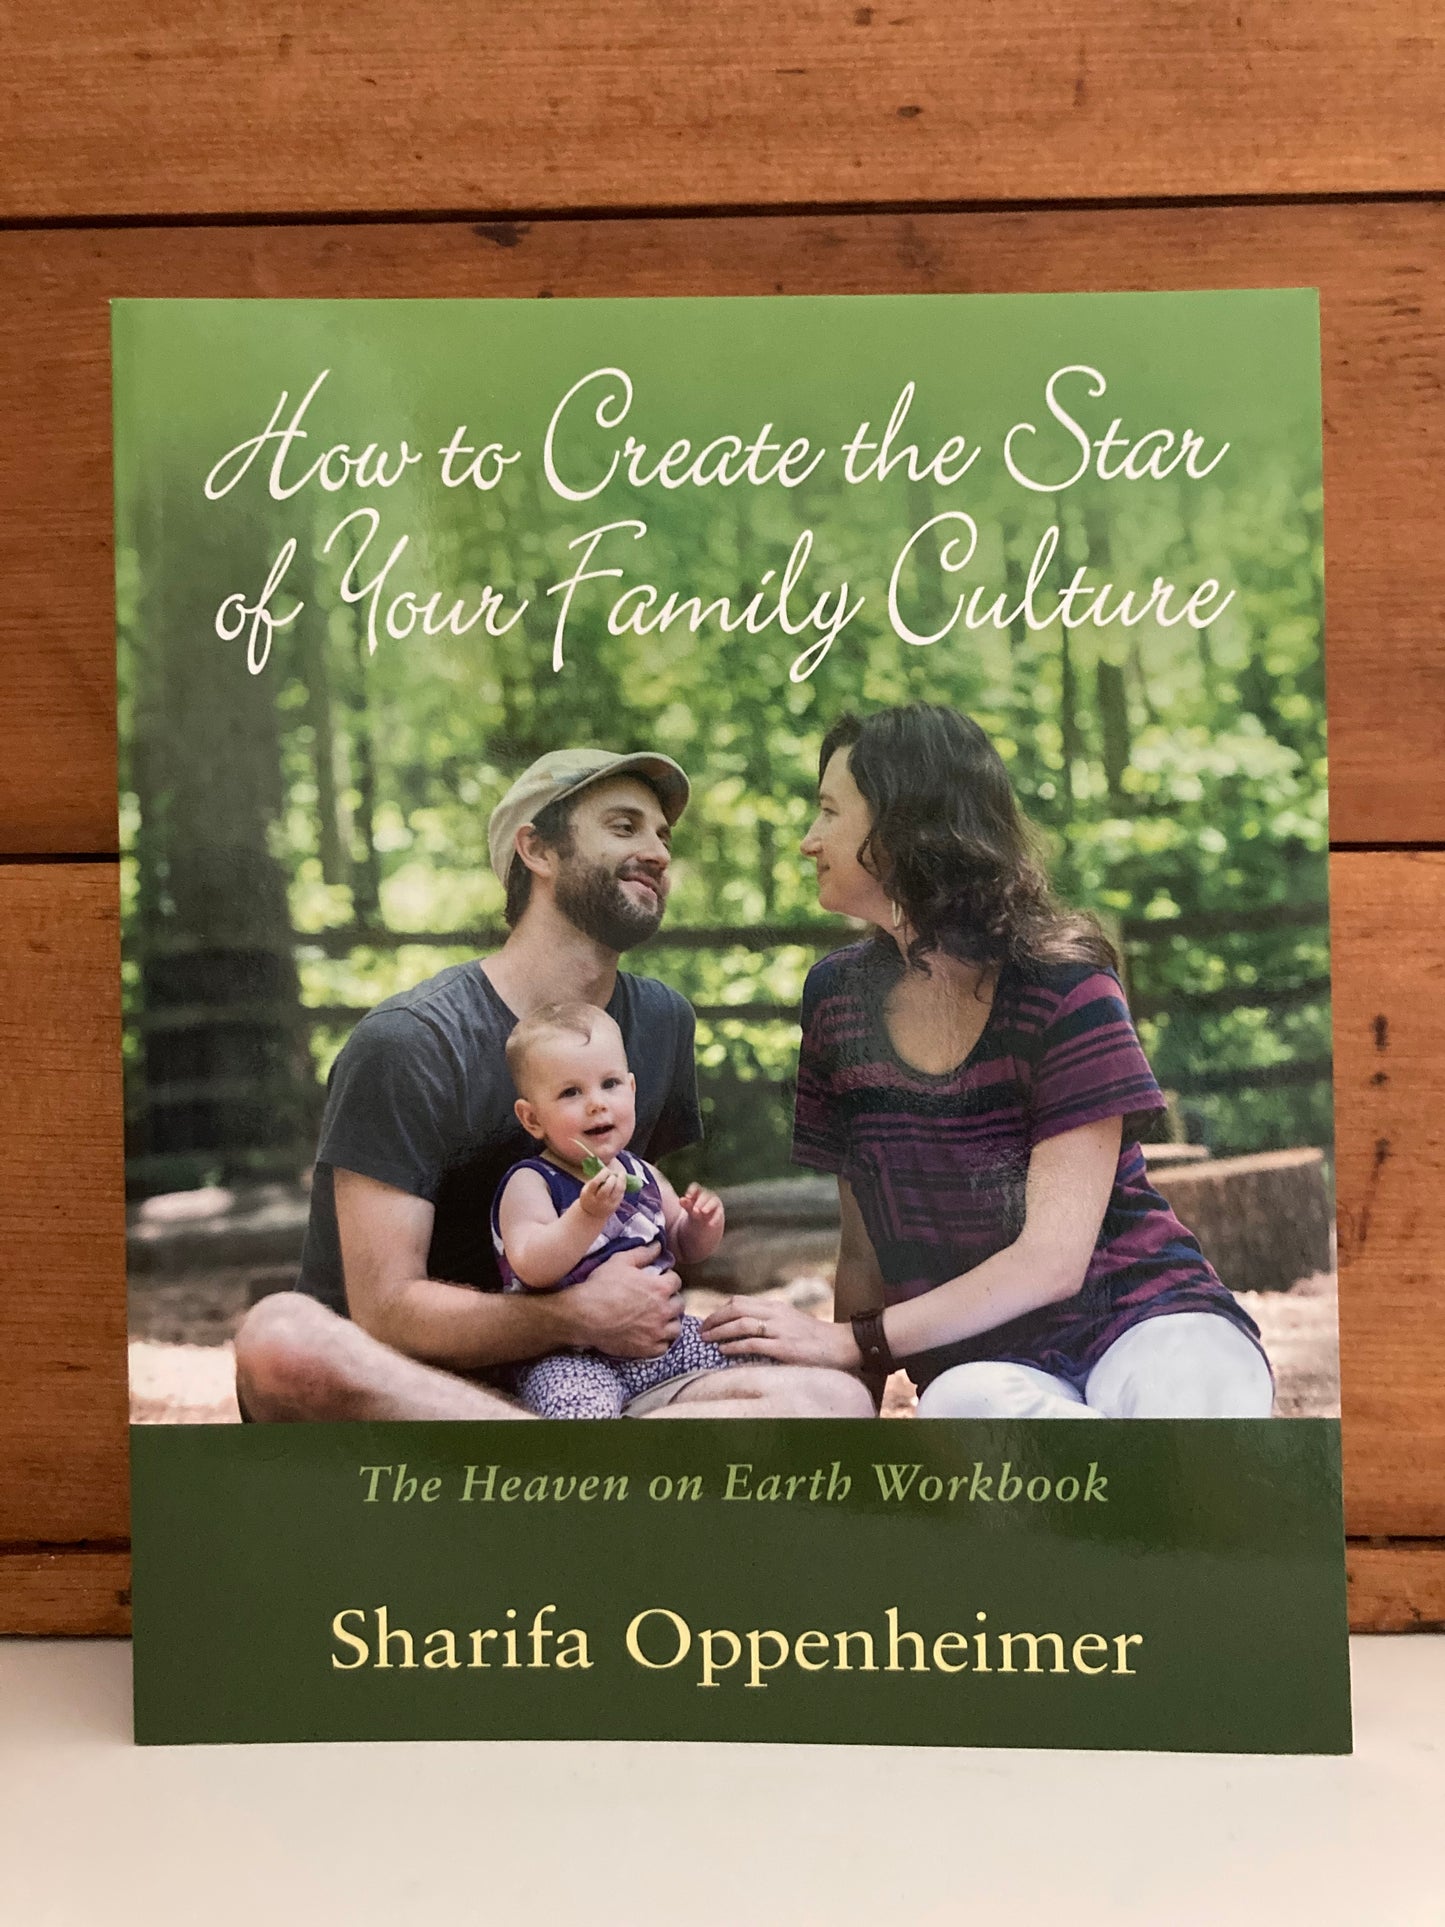 Parenting Resource Books - HEAVEN ON EARTH, and HOW TO CREATE THE STAR OF YOUR FAMILY CULTURE